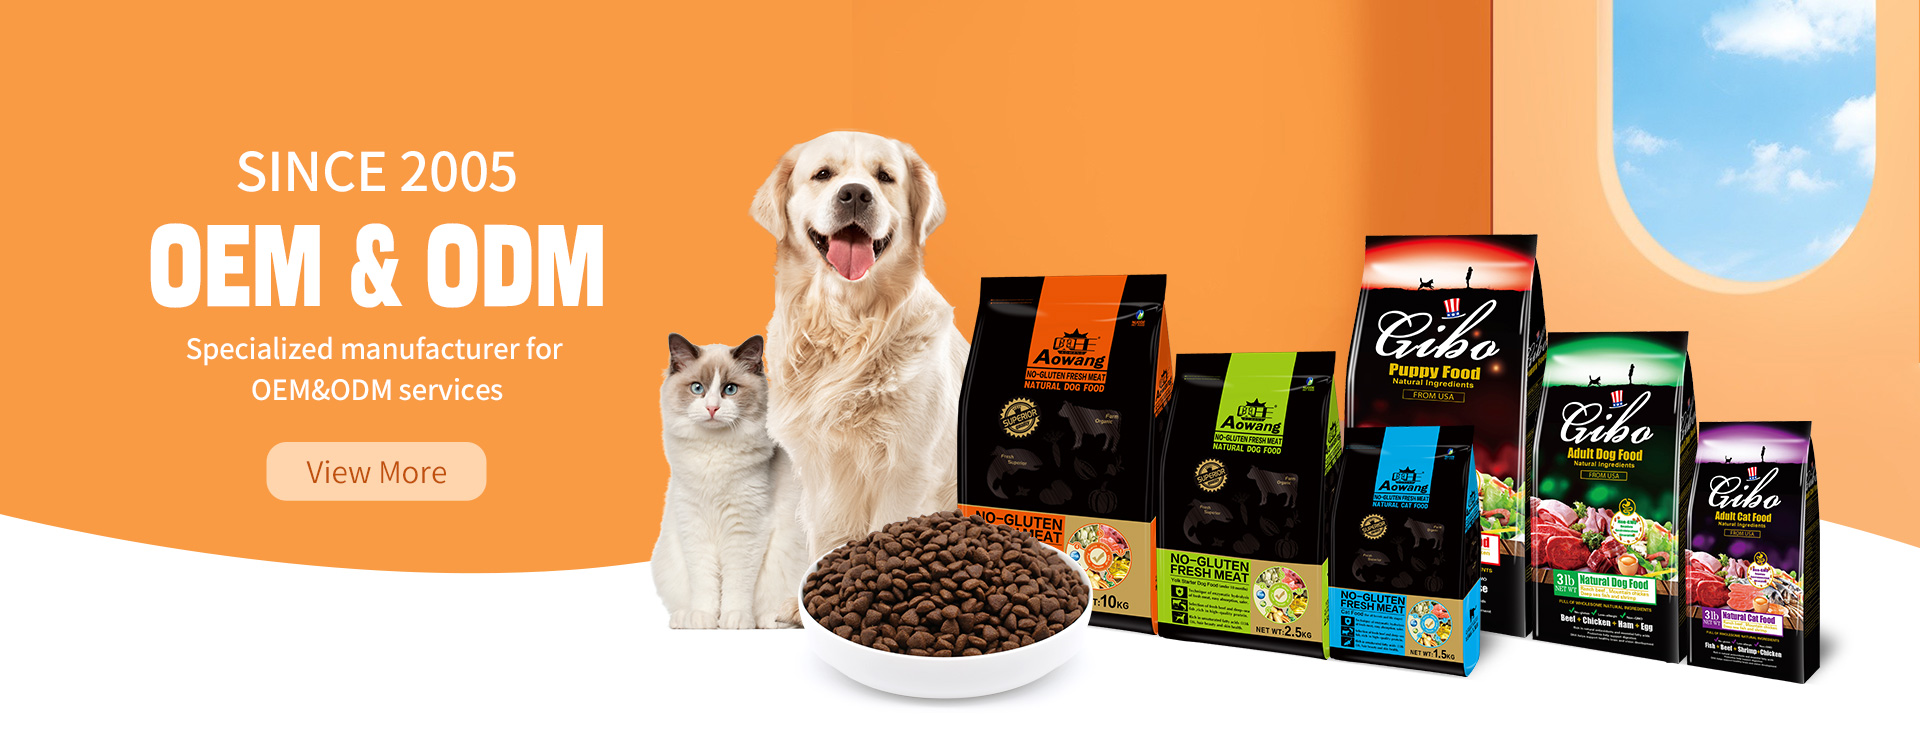 Xingtai Nuode Pet Products Co., Ltd.